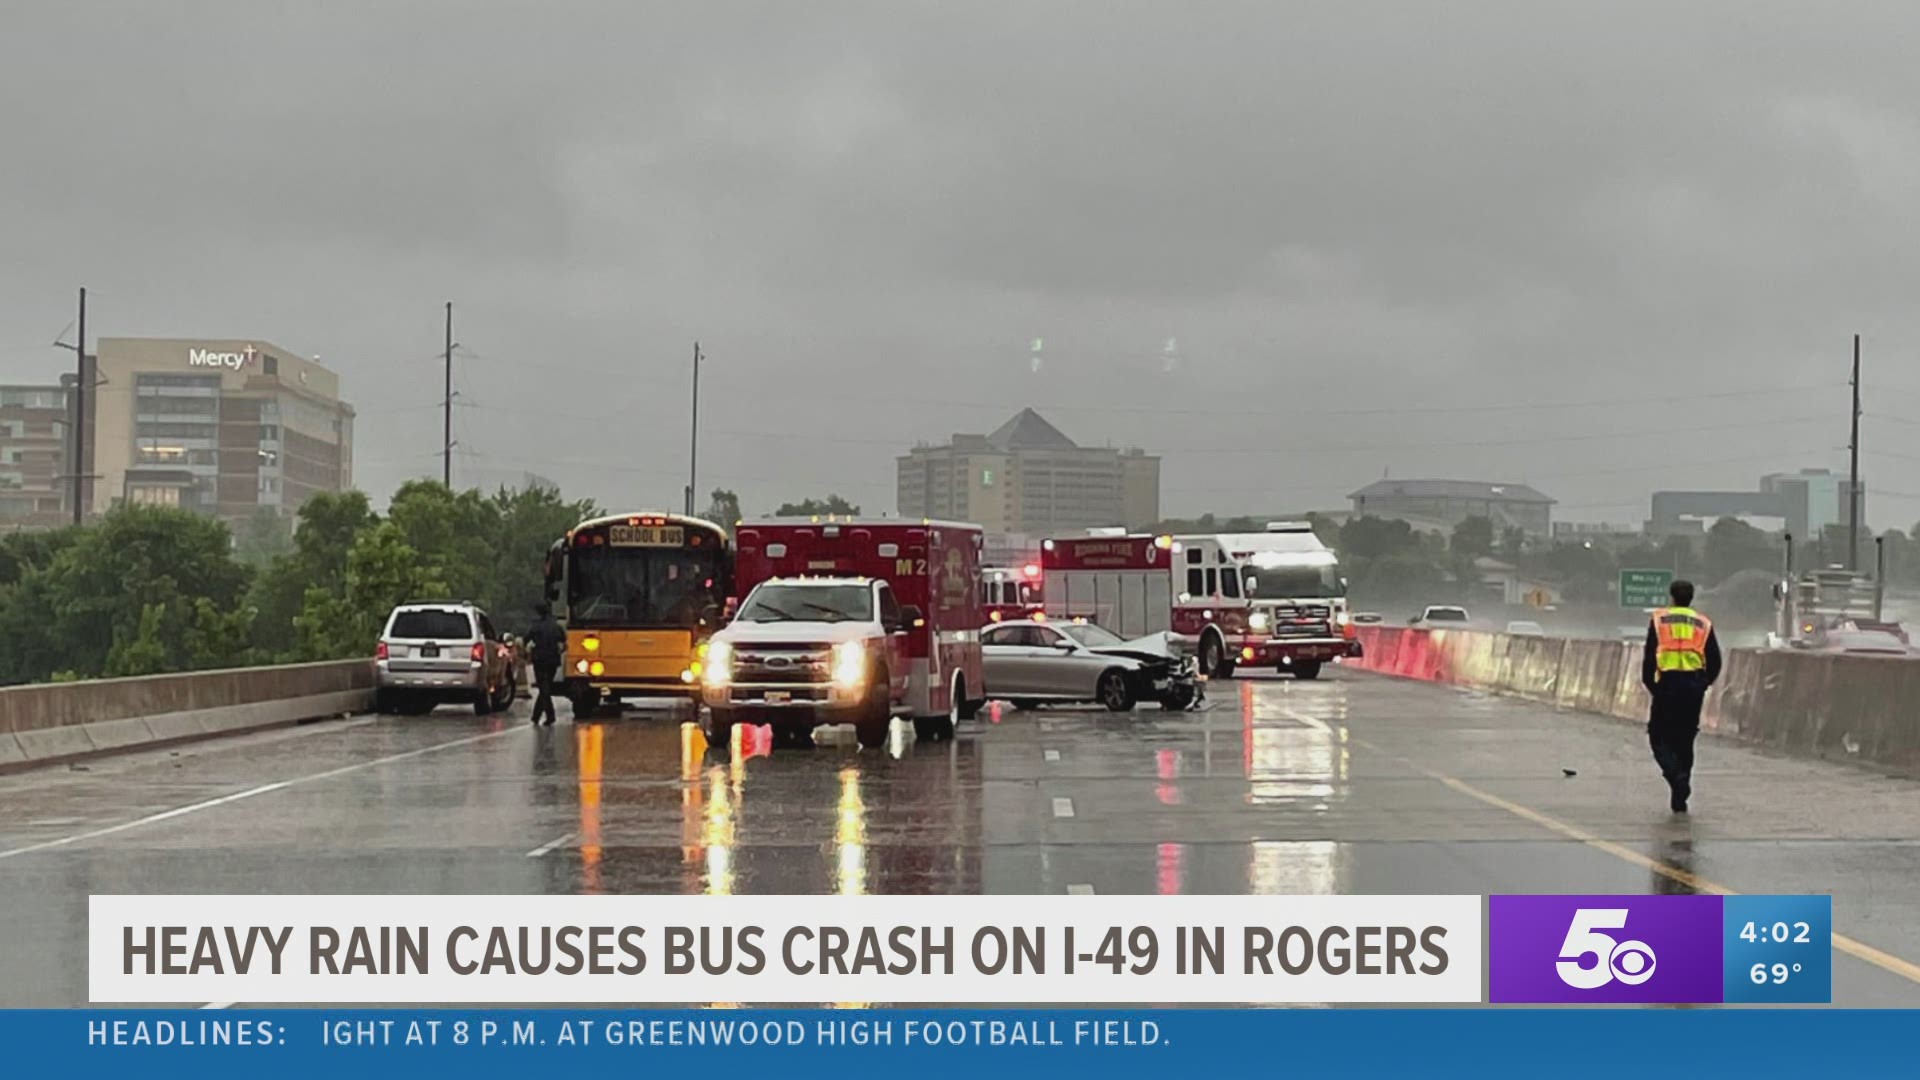 None of the students on board the bus at the time of the crash were injured.